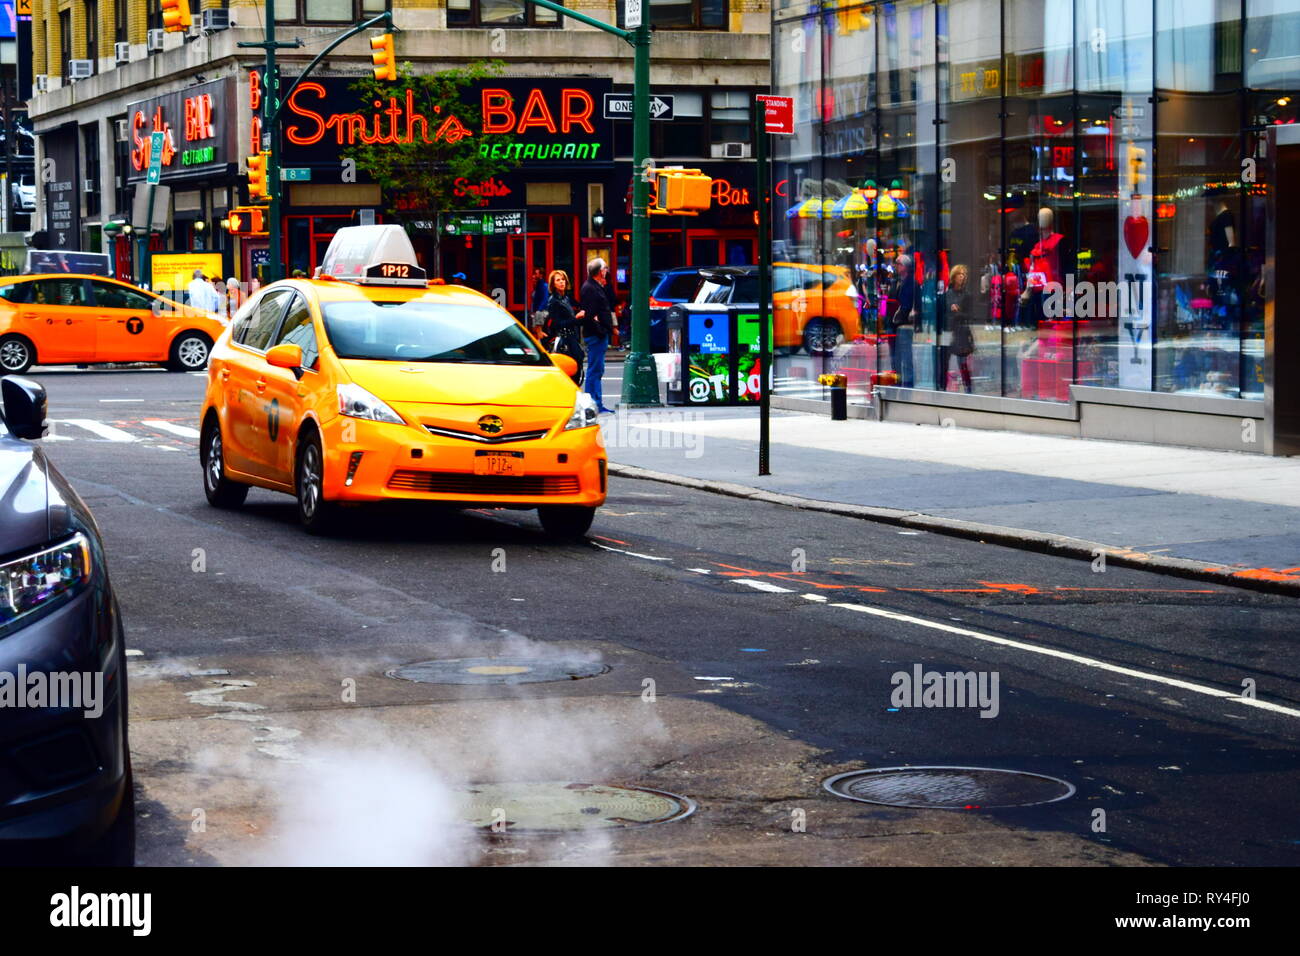 new york city yellow taxi - midtown / hell's kitchen with famous bar in background.2016 Stock Photo